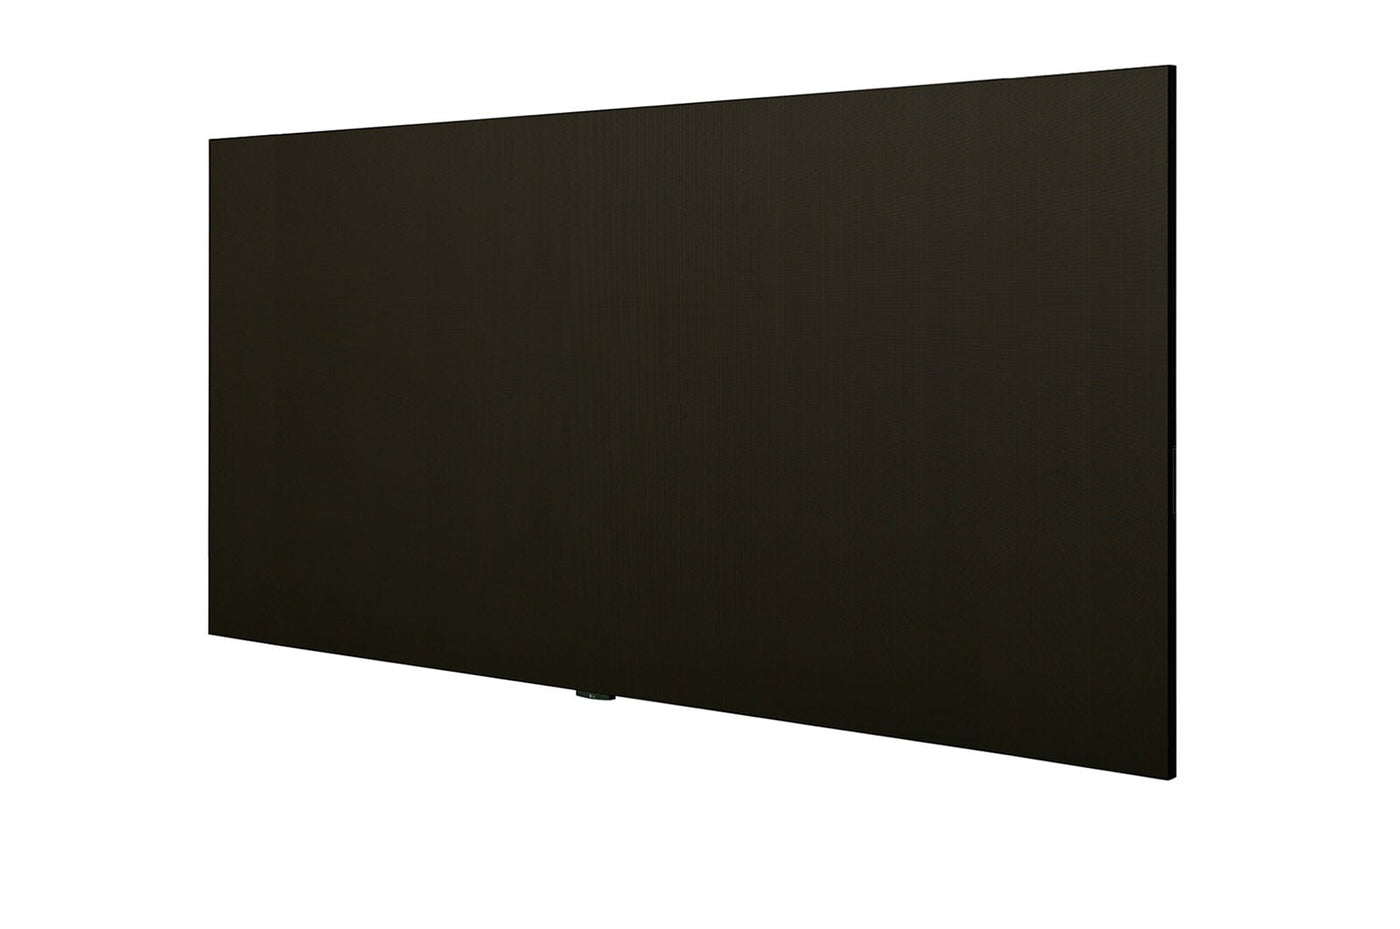 LG LAED 171'' All-in-One Direct View LED Display with 21:9 Aspect Ratio, Embedded Controller, & Built-in Speakers